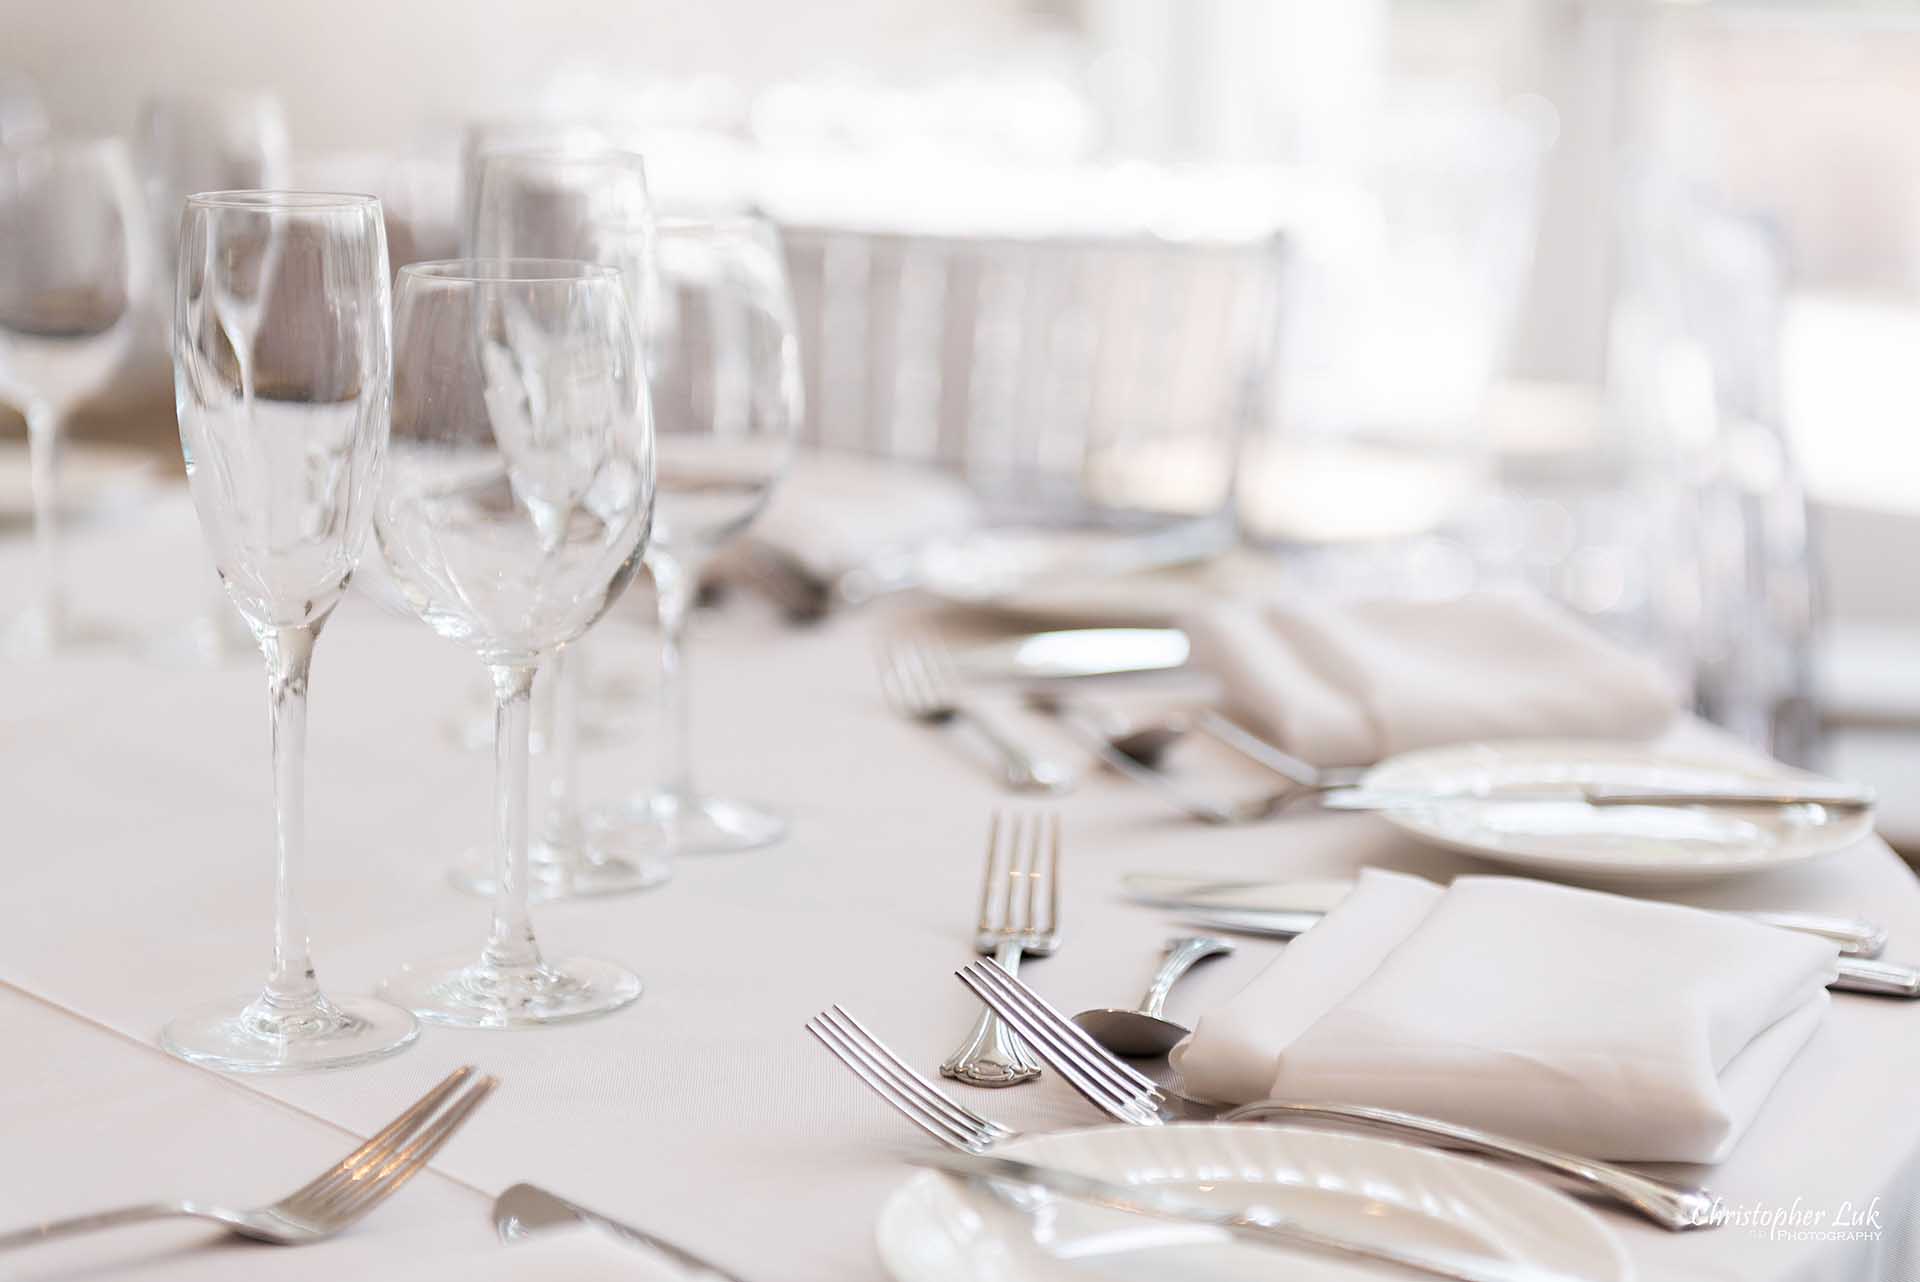 Christopher Luk Toronto Wedding Photographer - The Guild Inn Estate Guildwood Park and Gardens Event Venue Historical Scarborough Bluffs Bickord House Bistro Lunch Dinner Reception Hall Wide Tables Tablecloth Flatware Silverware Glassware Details